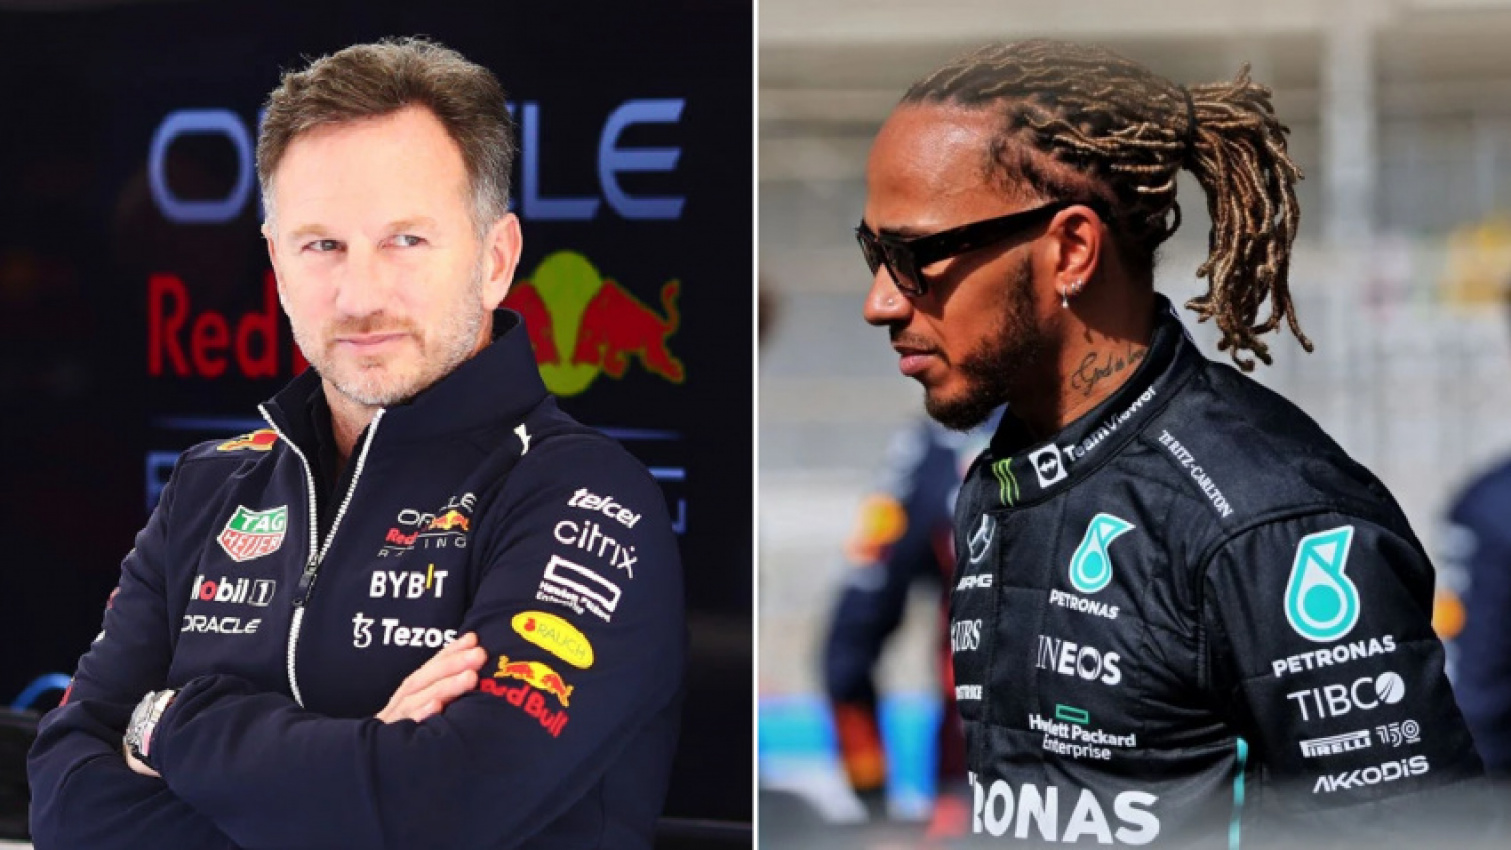 autos, cars, mercedes-benz, mercedes, christian horner restarts mercedes rivalry but red bull deny quotes over car legality